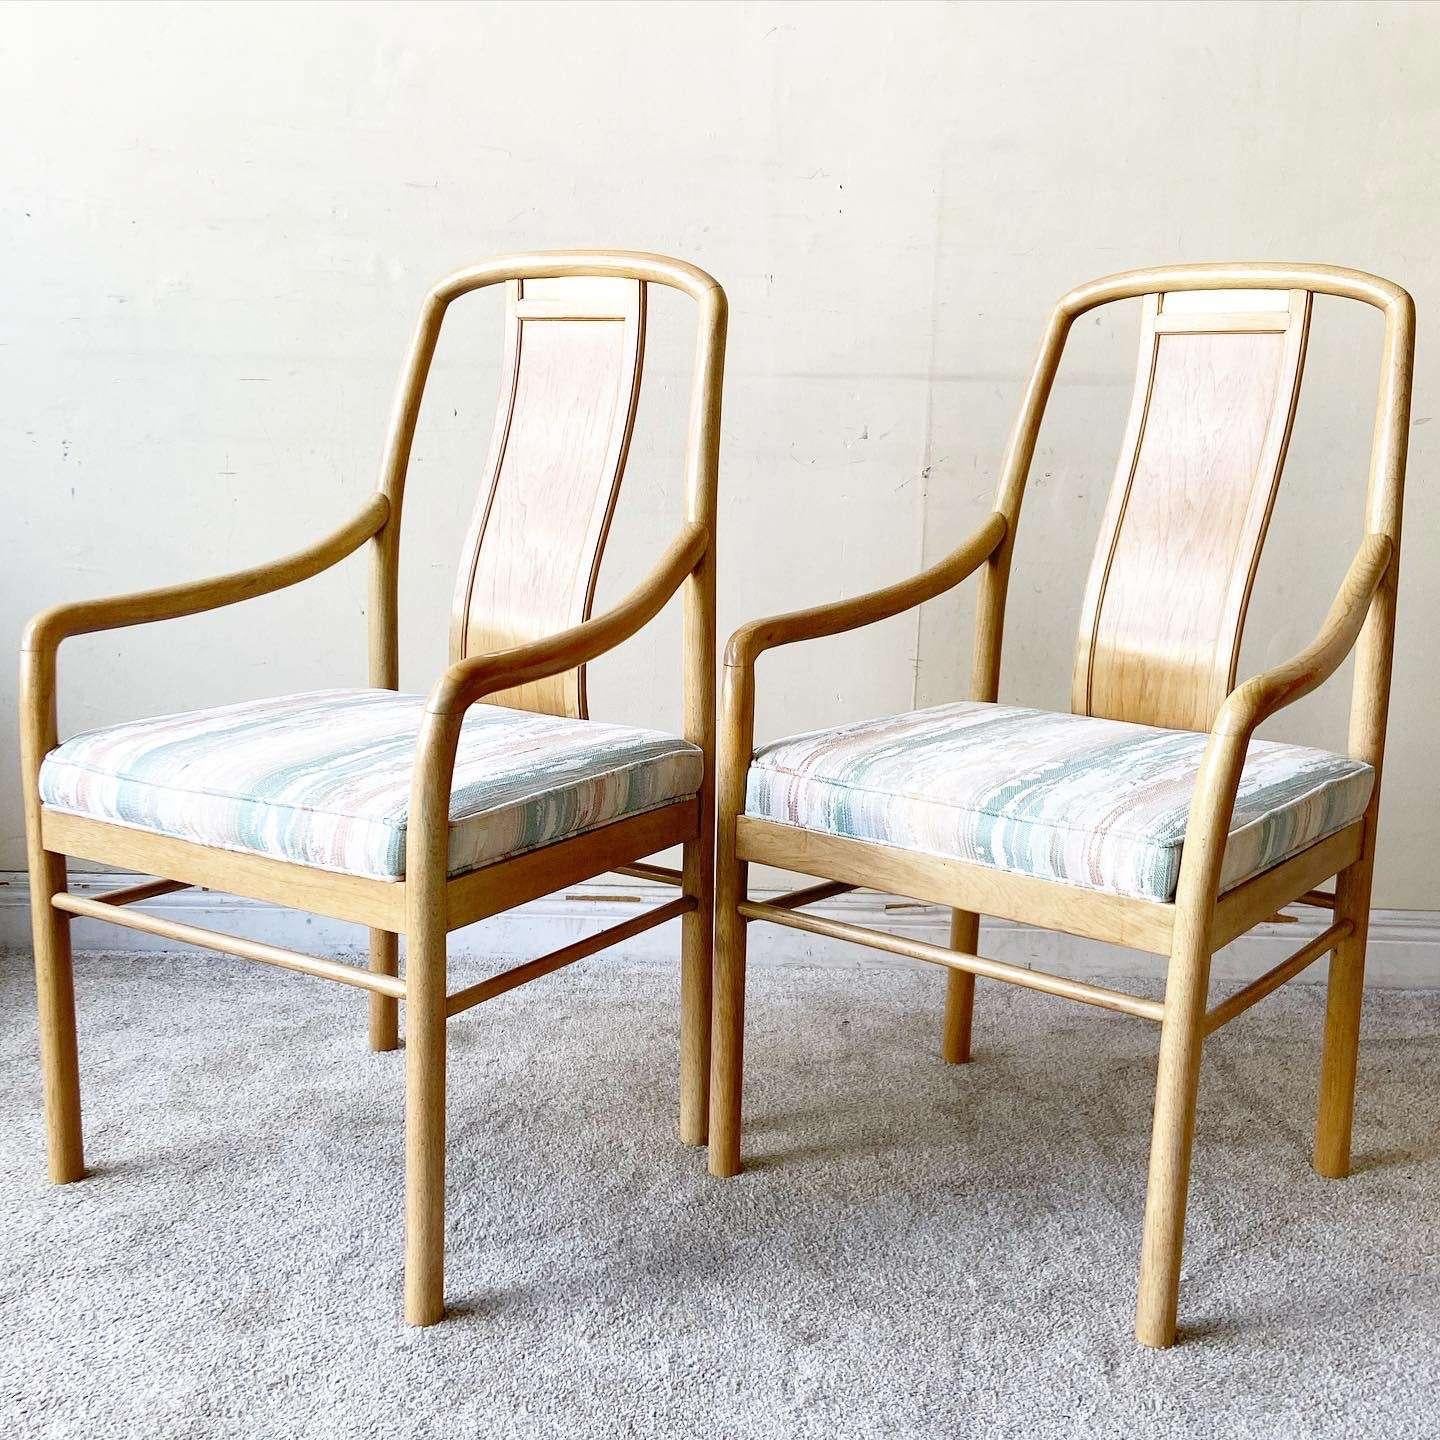 Amazing pair of mid century modern dining chairs by Drexel Heritage. Each ratio a wooden frame with a gold strip at the top of the back rest.

Seat height is 19.5 in